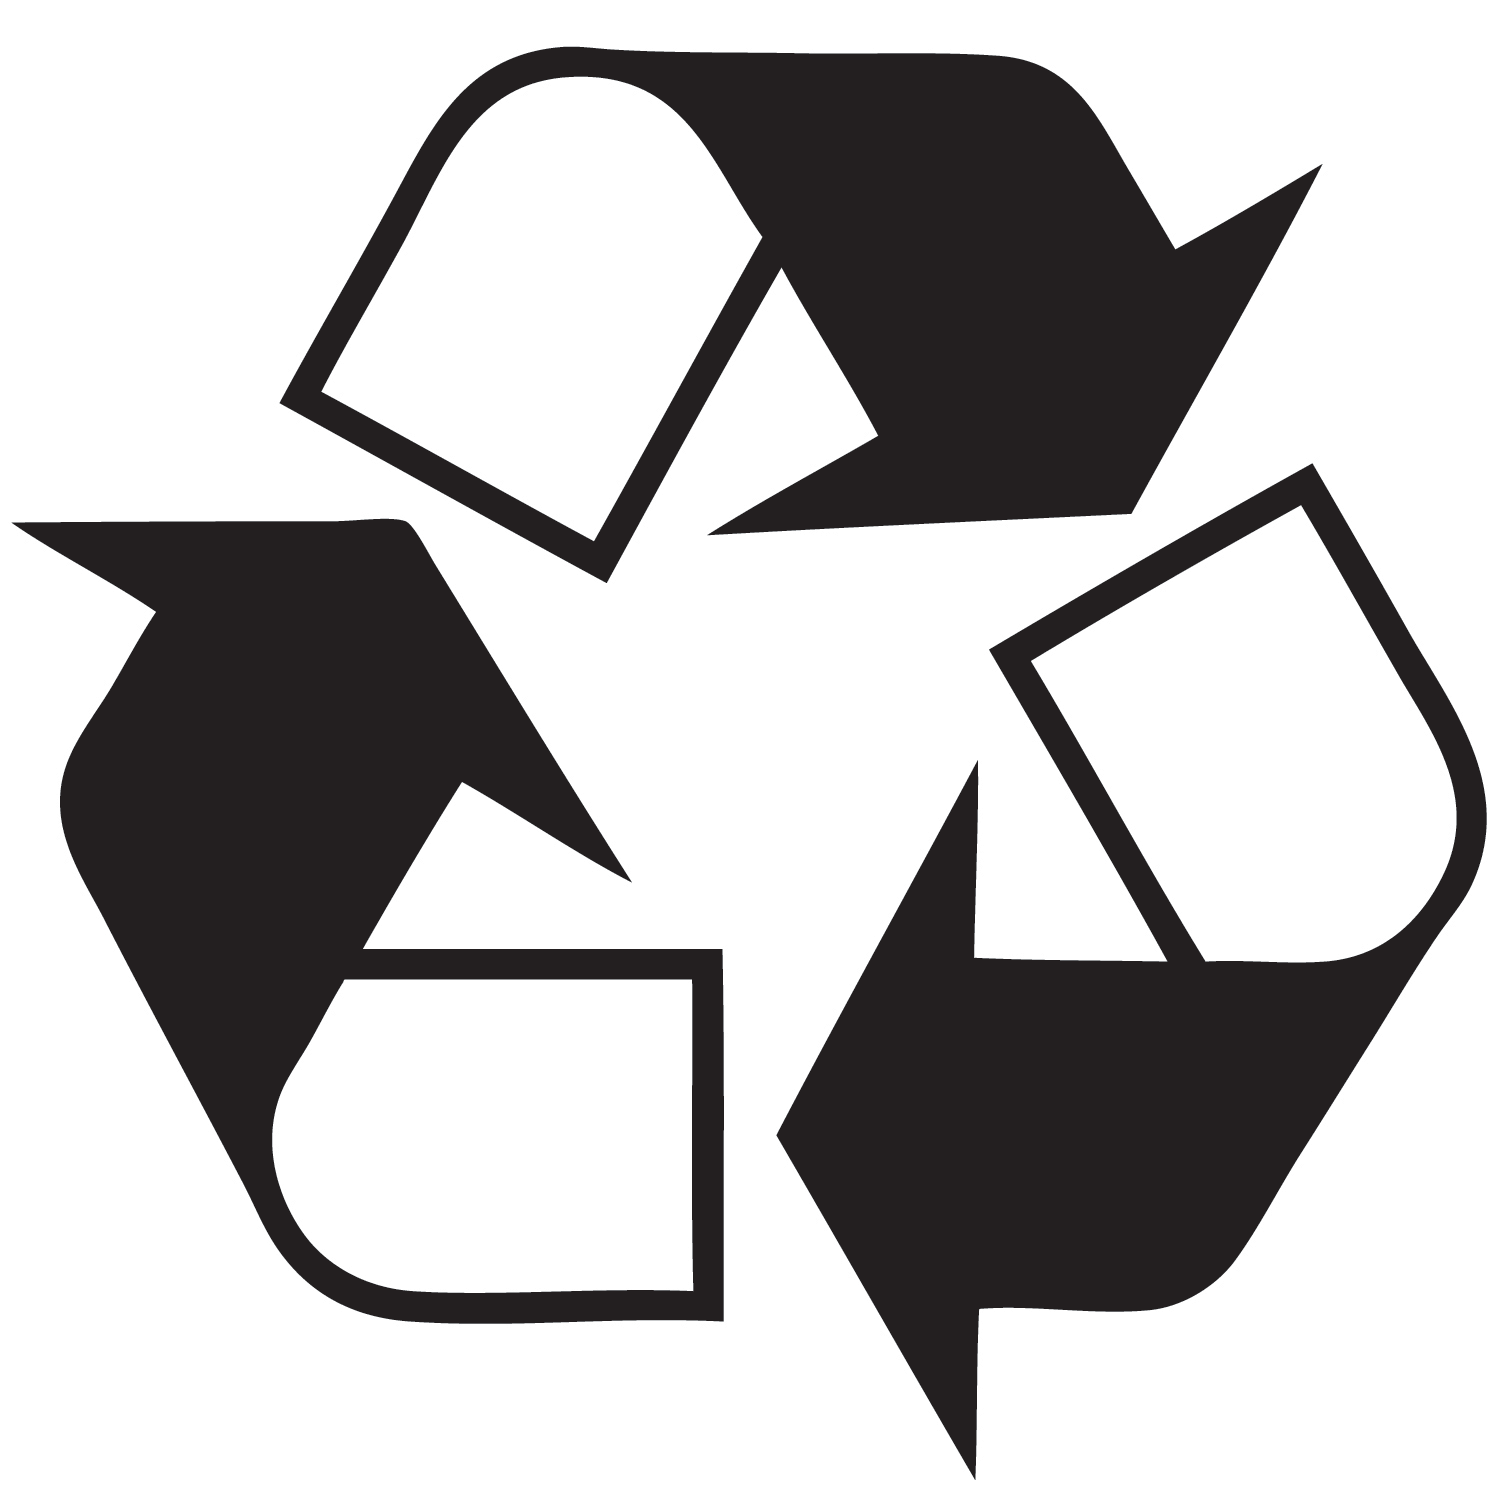 Free Printable Recycling Symbol - ClipArt Best